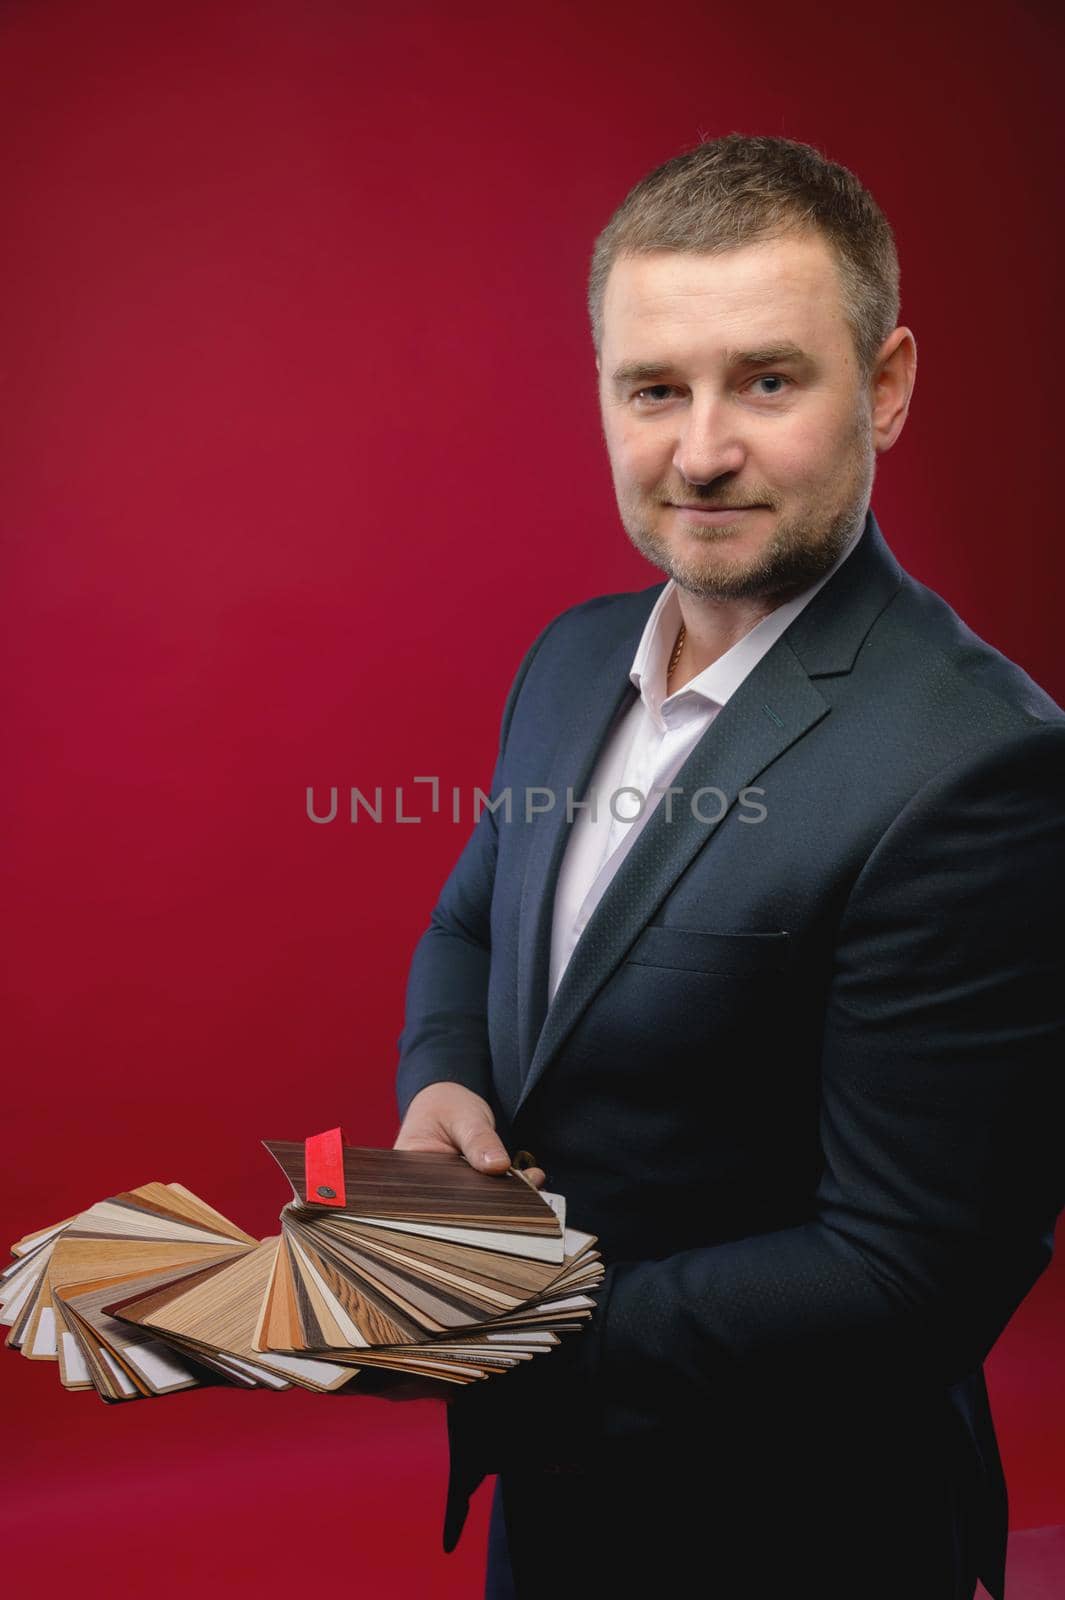 Portrait of a handsome man in an elegant suit Offers surface probes for kitchen furniture on a red background. Studio shot looking thoughtfully into the camera.